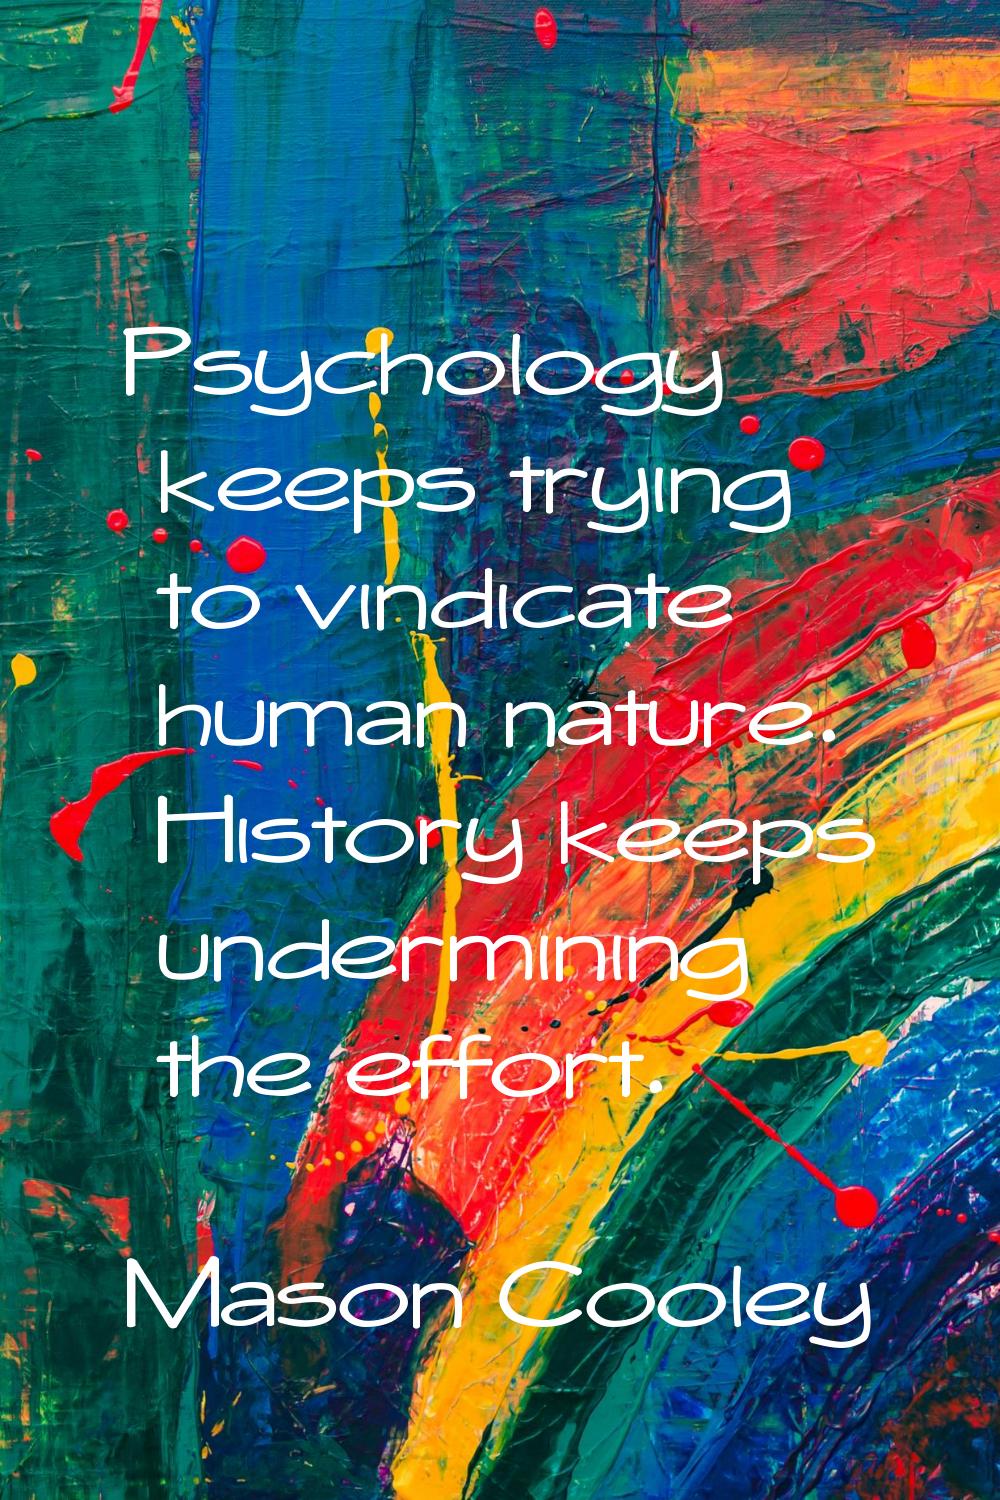 Psychology keeps trying to vindicate human nature. History keeps undermining the effort.